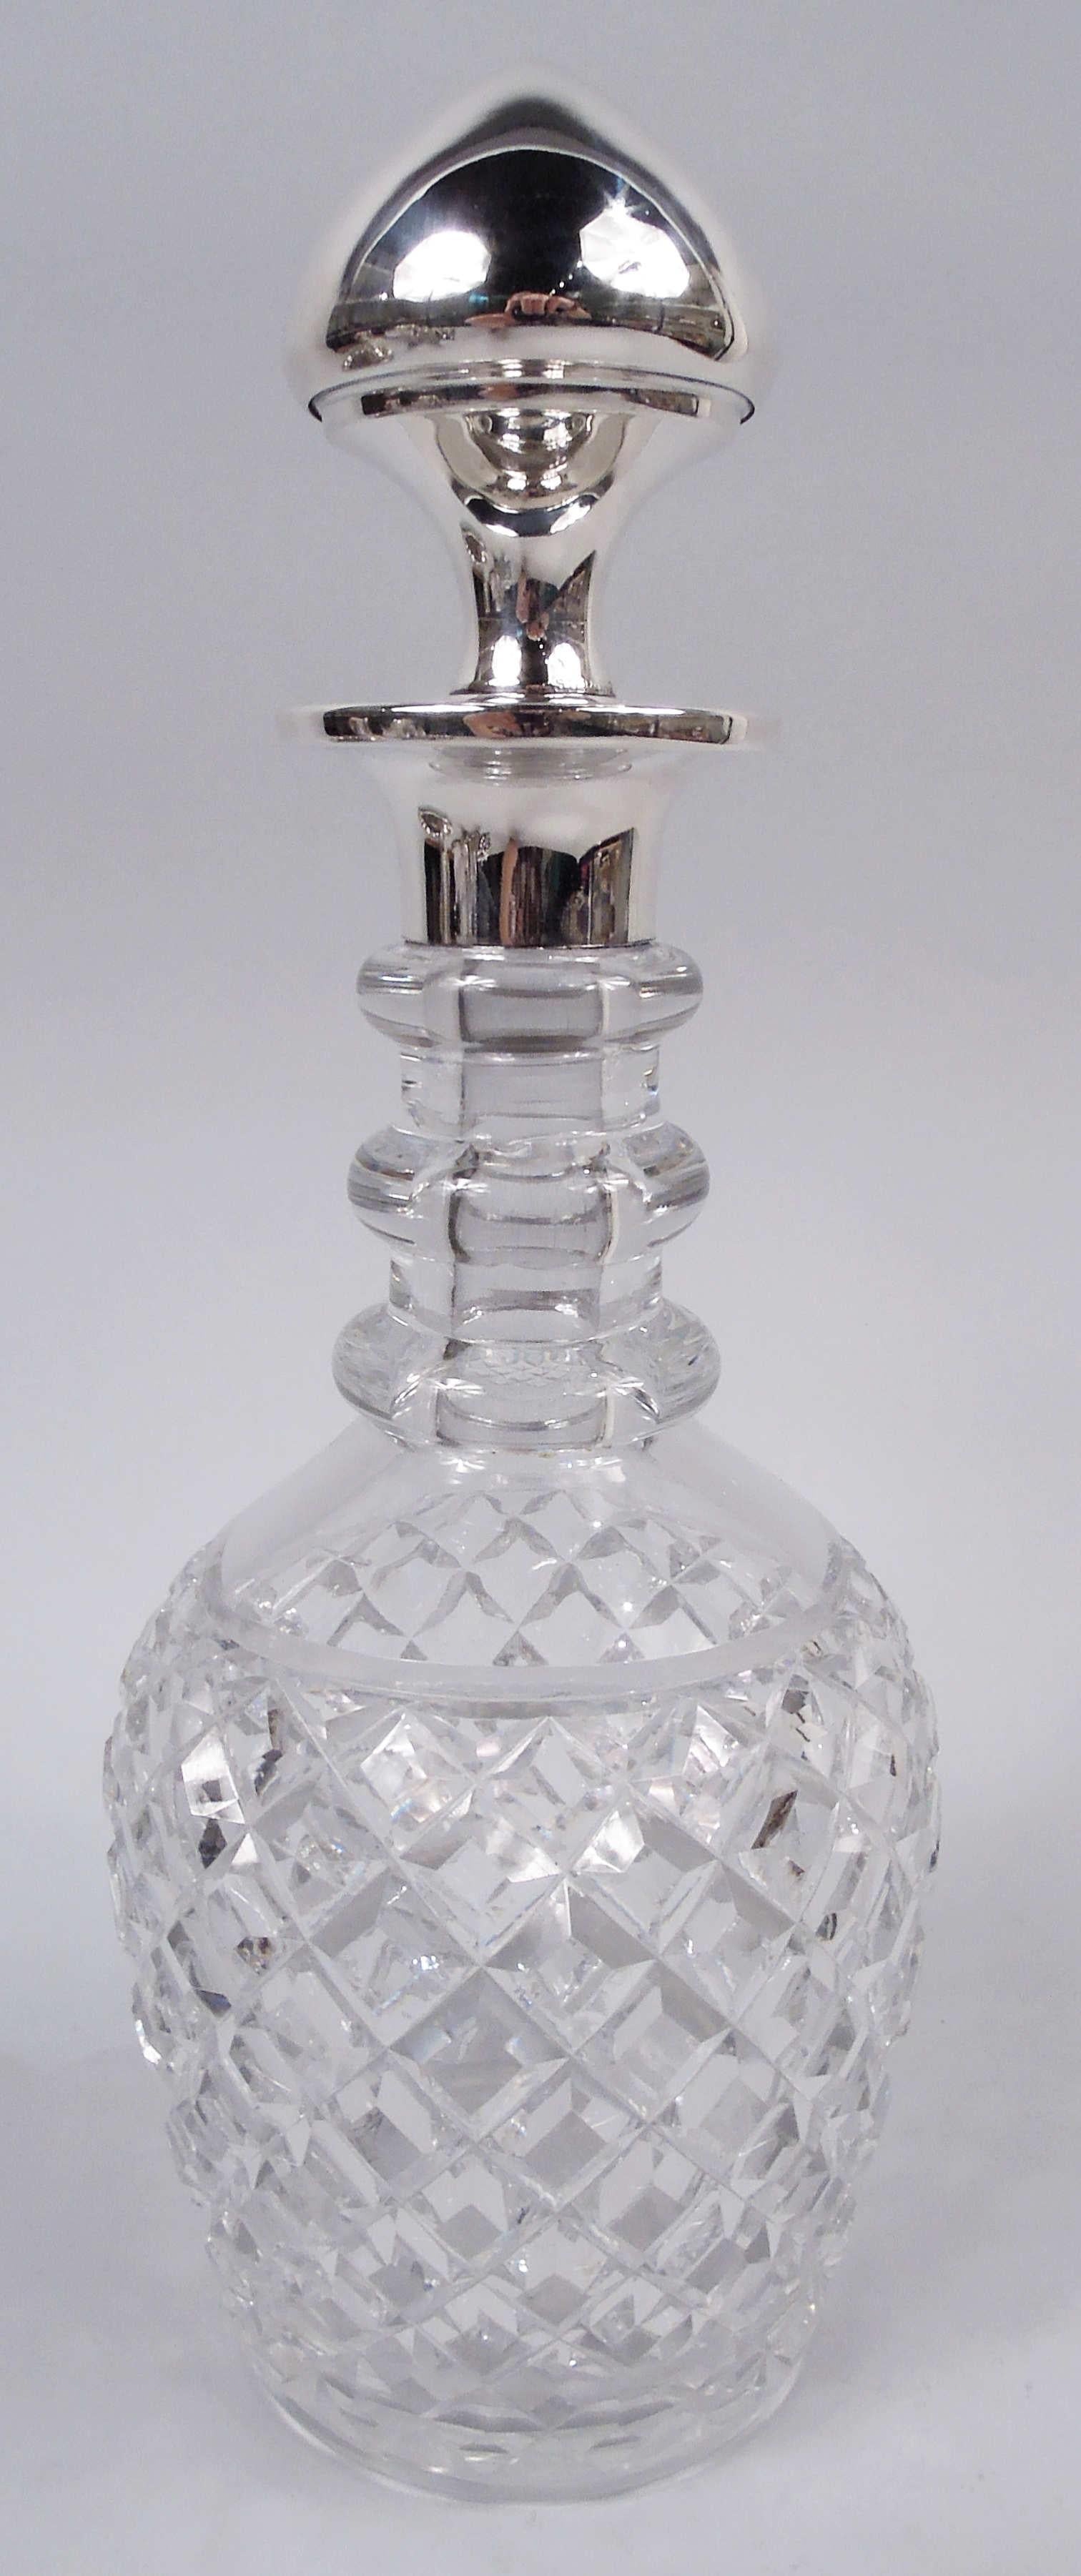 American Edwardian glass decanter with sterling silver mounts, ca 1910. Ovoid bowl with raised diaper; cylindrical neck with 3 rings; neck inset with sterling silver collar and wide mouth rim. Conical stopper same. Stopper and neck marked